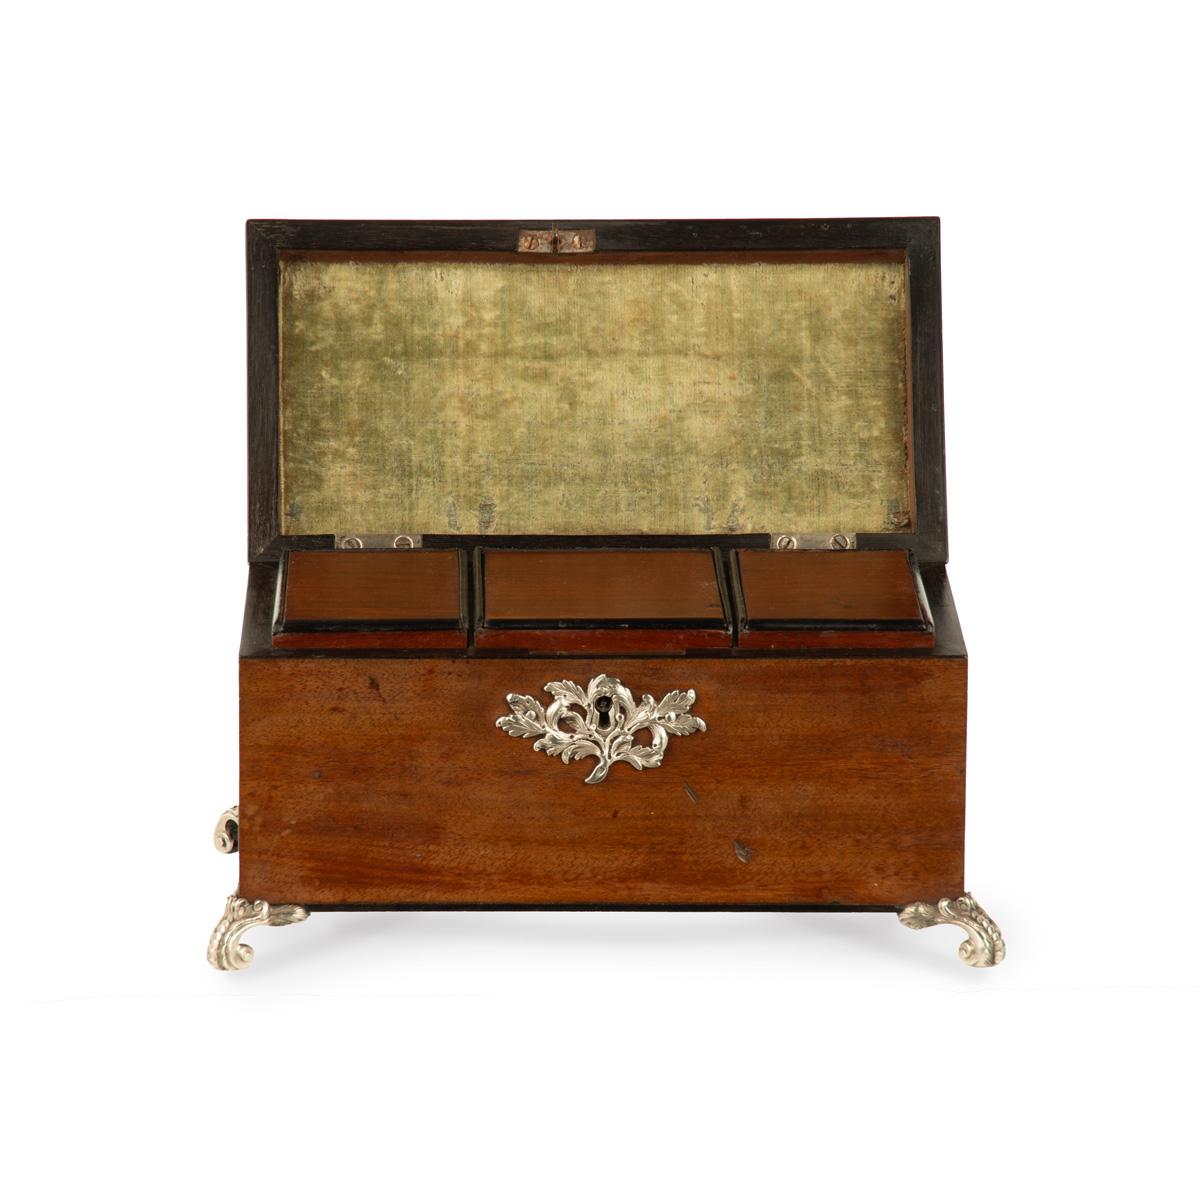 A late George III mahogany tea caddy, of rectangular form the hinged top opening to reveal three compartments with sliding lids, with silver mounts including a foliate scroll handle, an asymmetrical key escutcheon and four scroll feet,  and ebony